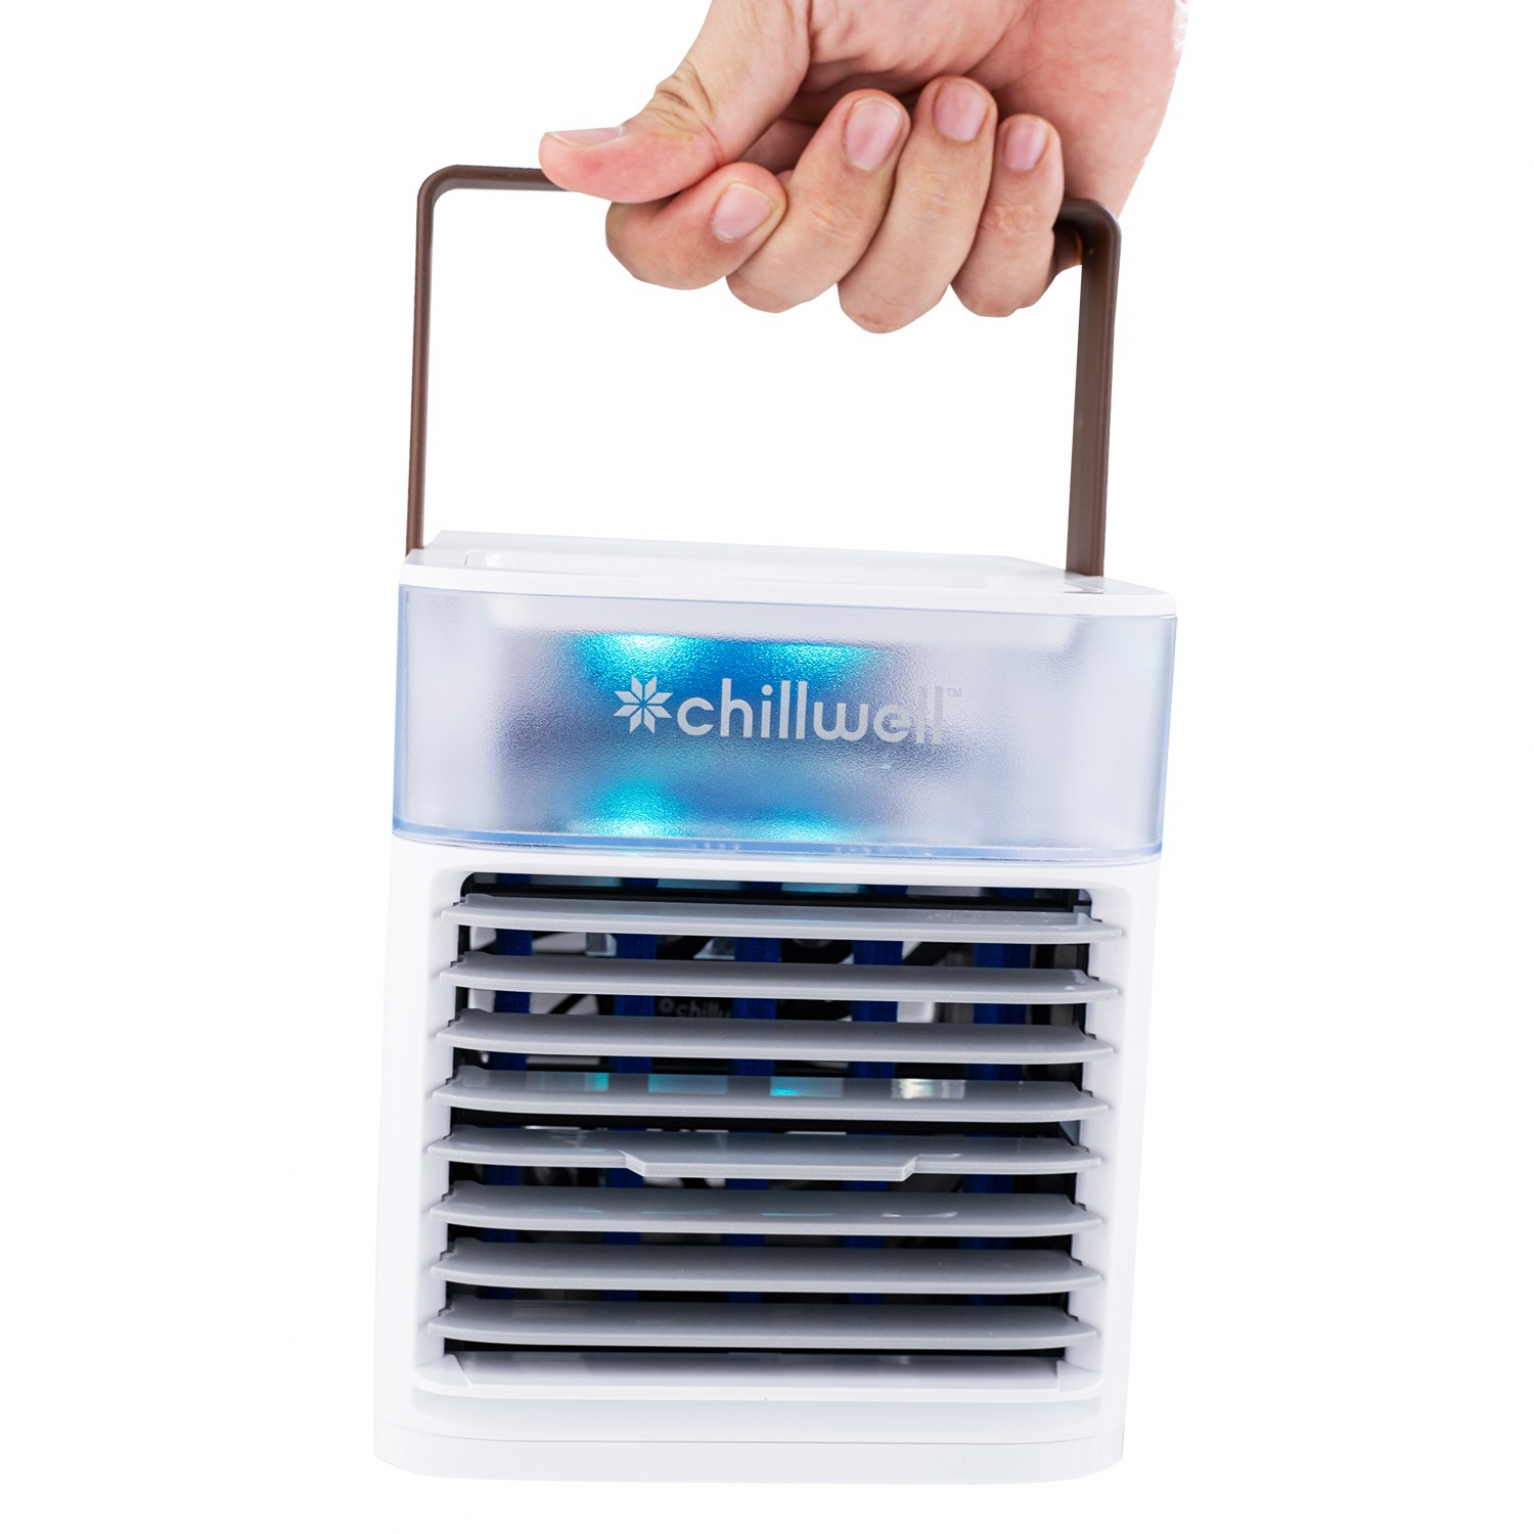 Chillwell AC Cooler Ratings